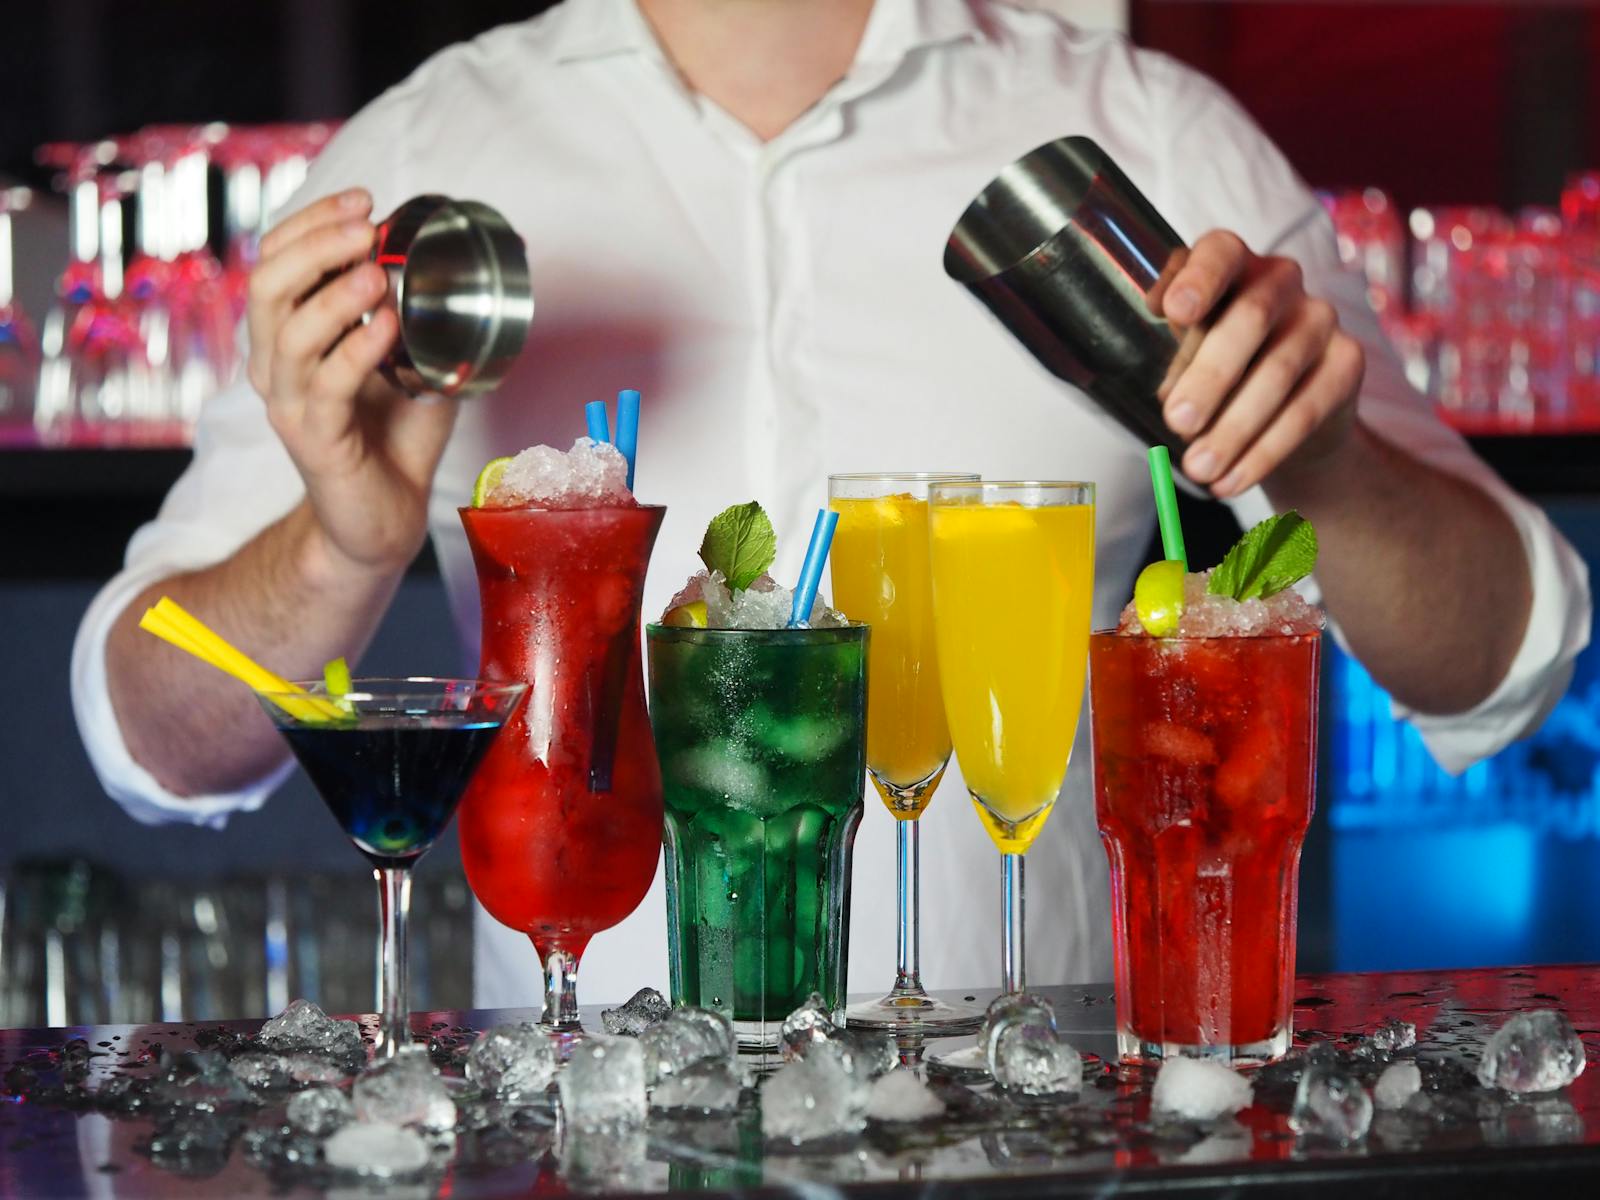 The 11 Expressions That Only True Bartenders Understand